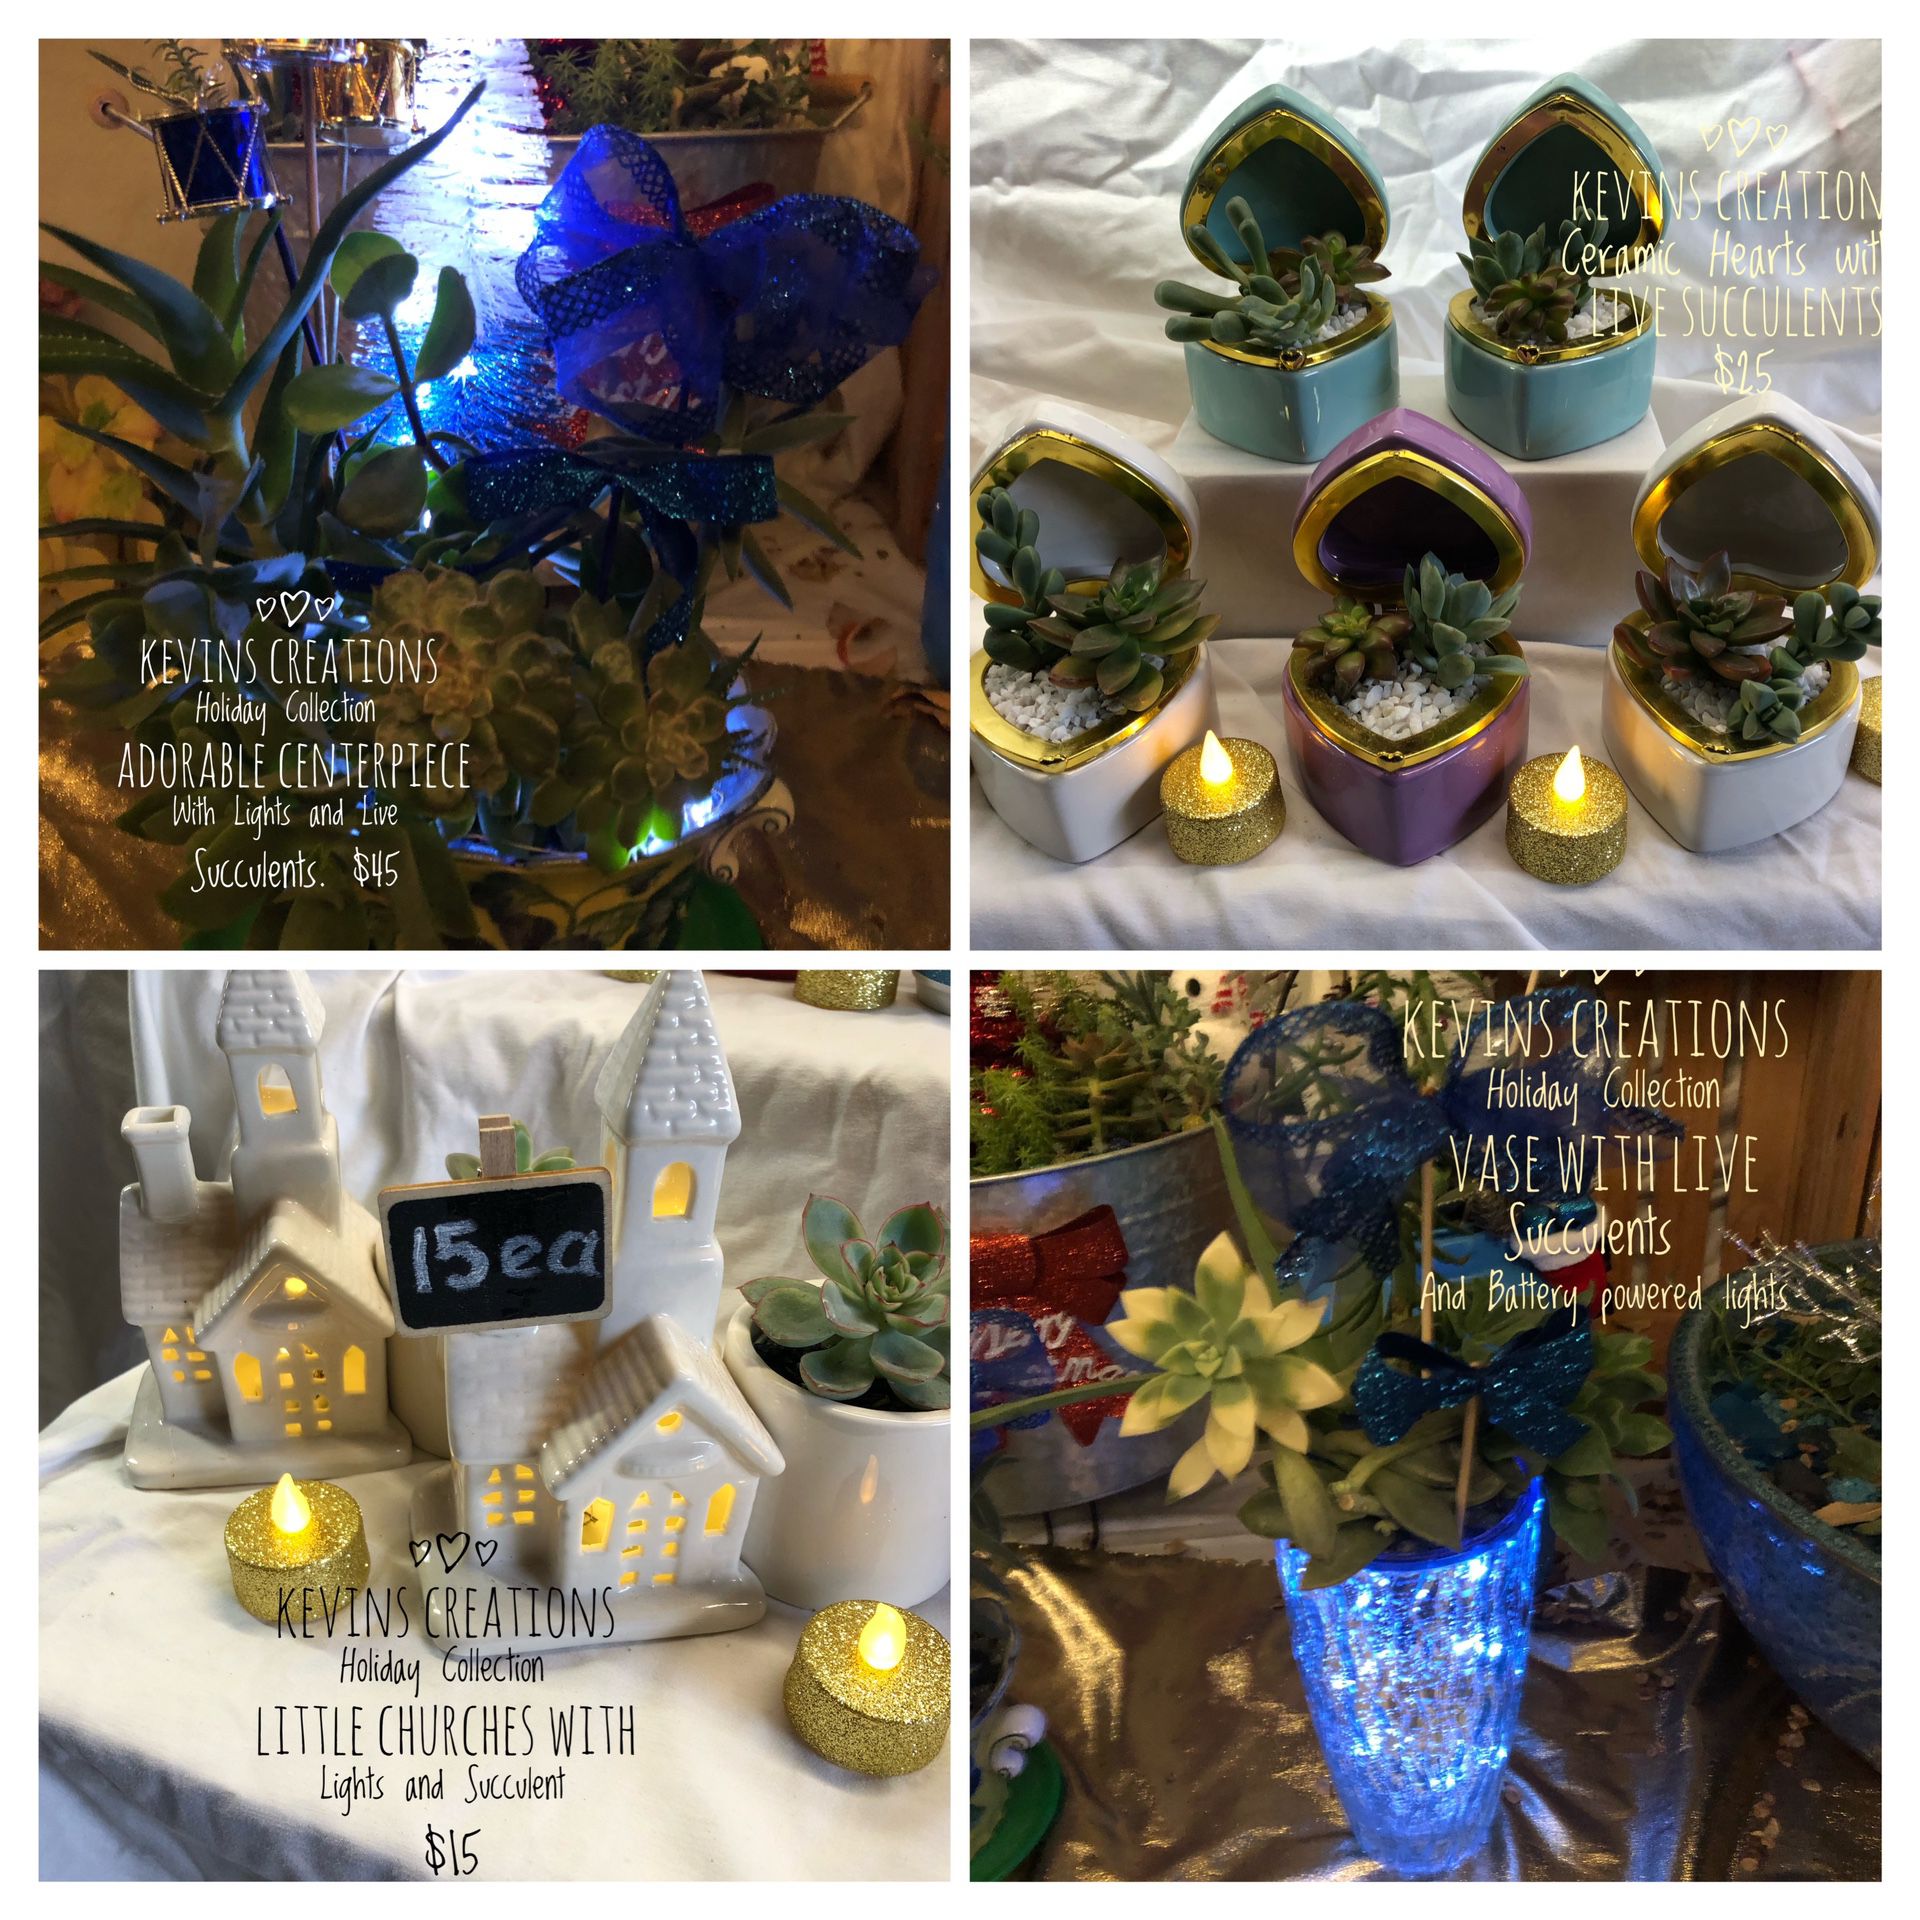 Kevin’s Creations Holiday Collection Beautiful Succulent Arrangements With Battery Powered Waterproof Lights 